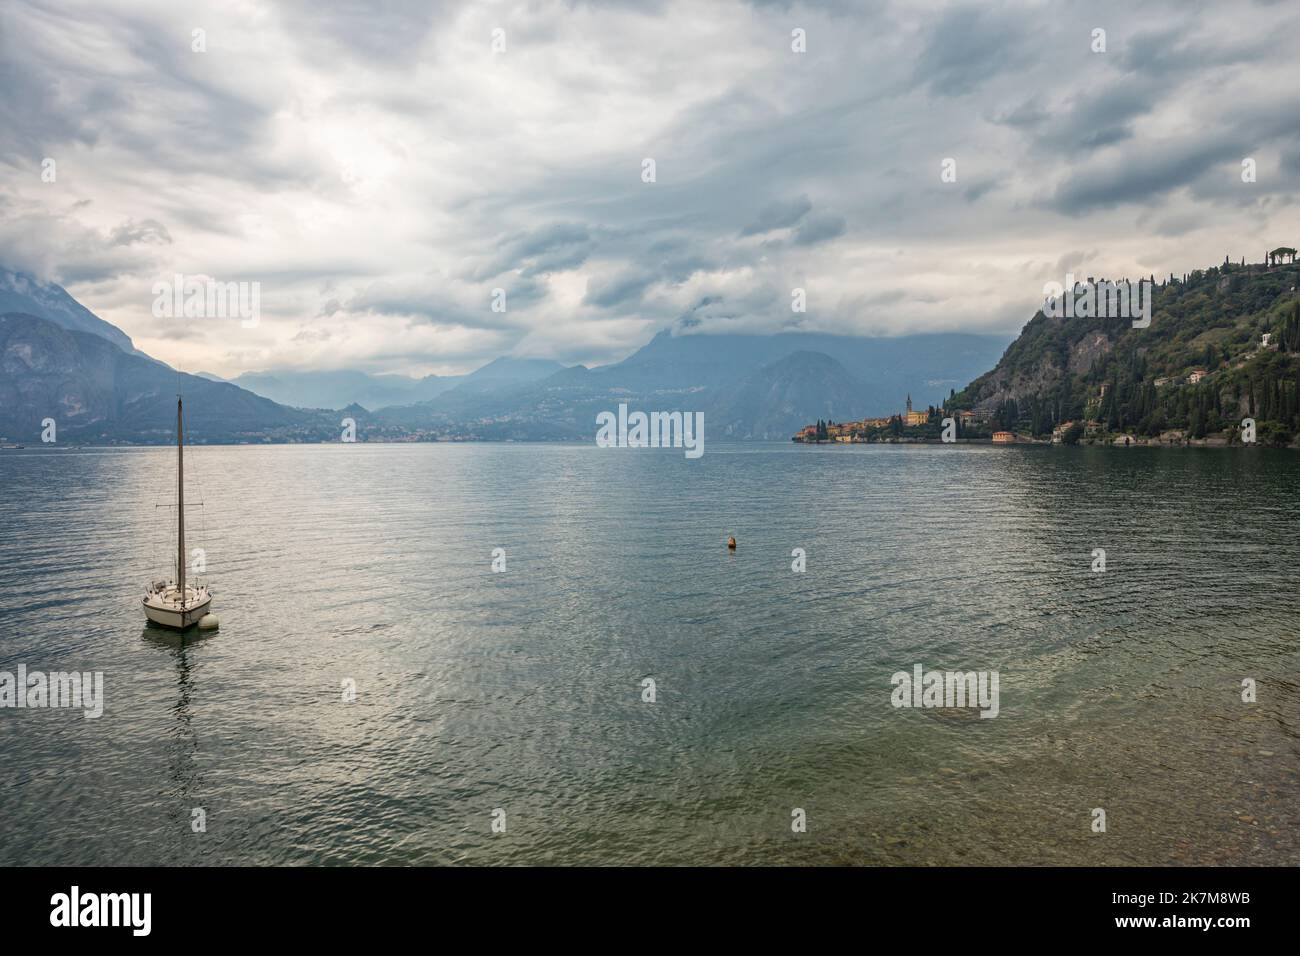 View of lake Como near Varenna viewing to Menaggio, moored sail boat in foreground Stock Photo